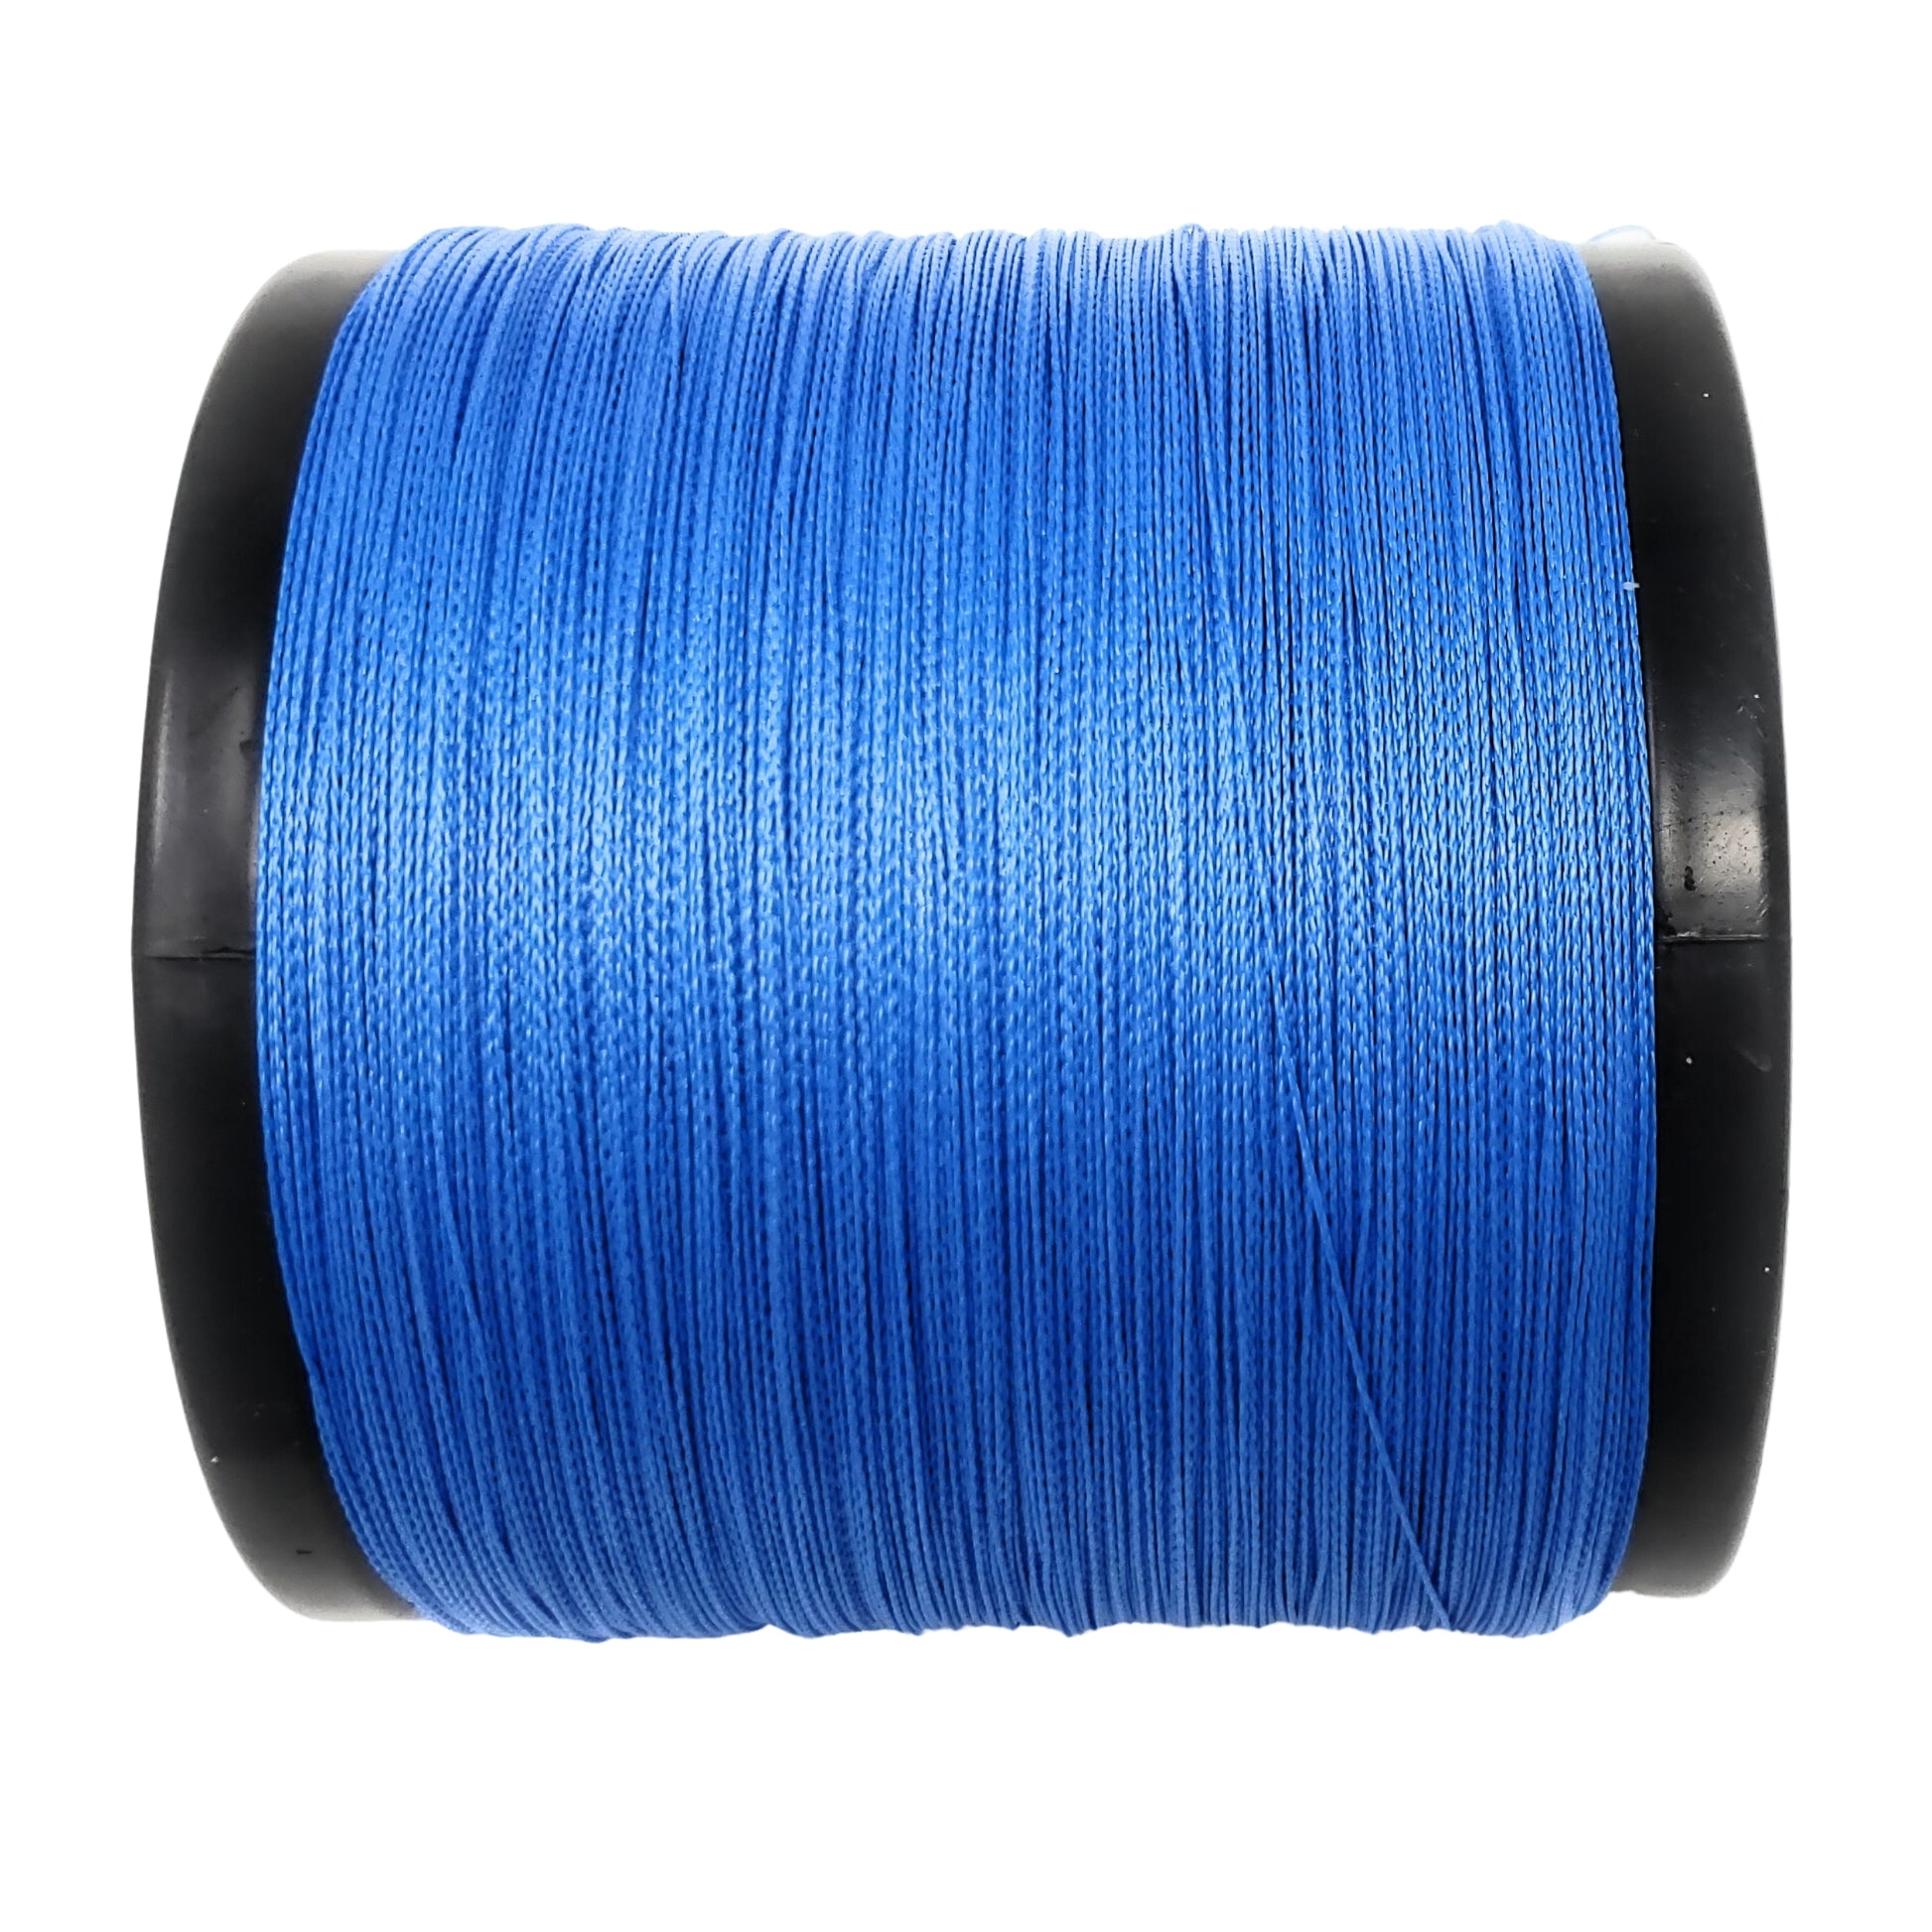 Reaction Tackle Braided Fishing Line - Pro Grade Power Performance for  Saltwater or Freshwater - Colored Diamond Braid for Extra Visibility